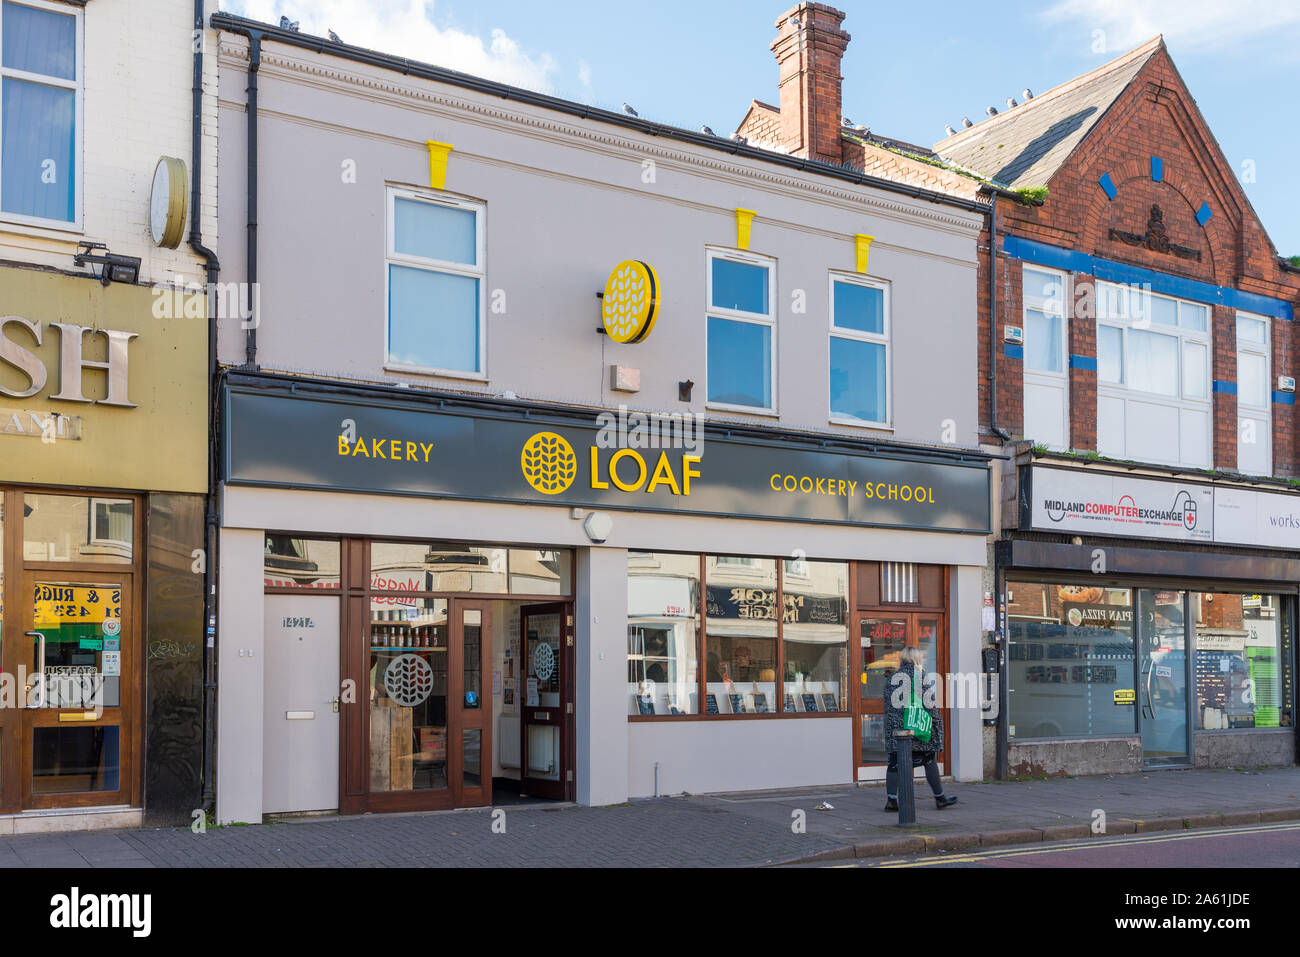 Loaf artisan bakery and cookery school in Pershore Road, Stirchley, Birmingham, UK Stock Photo